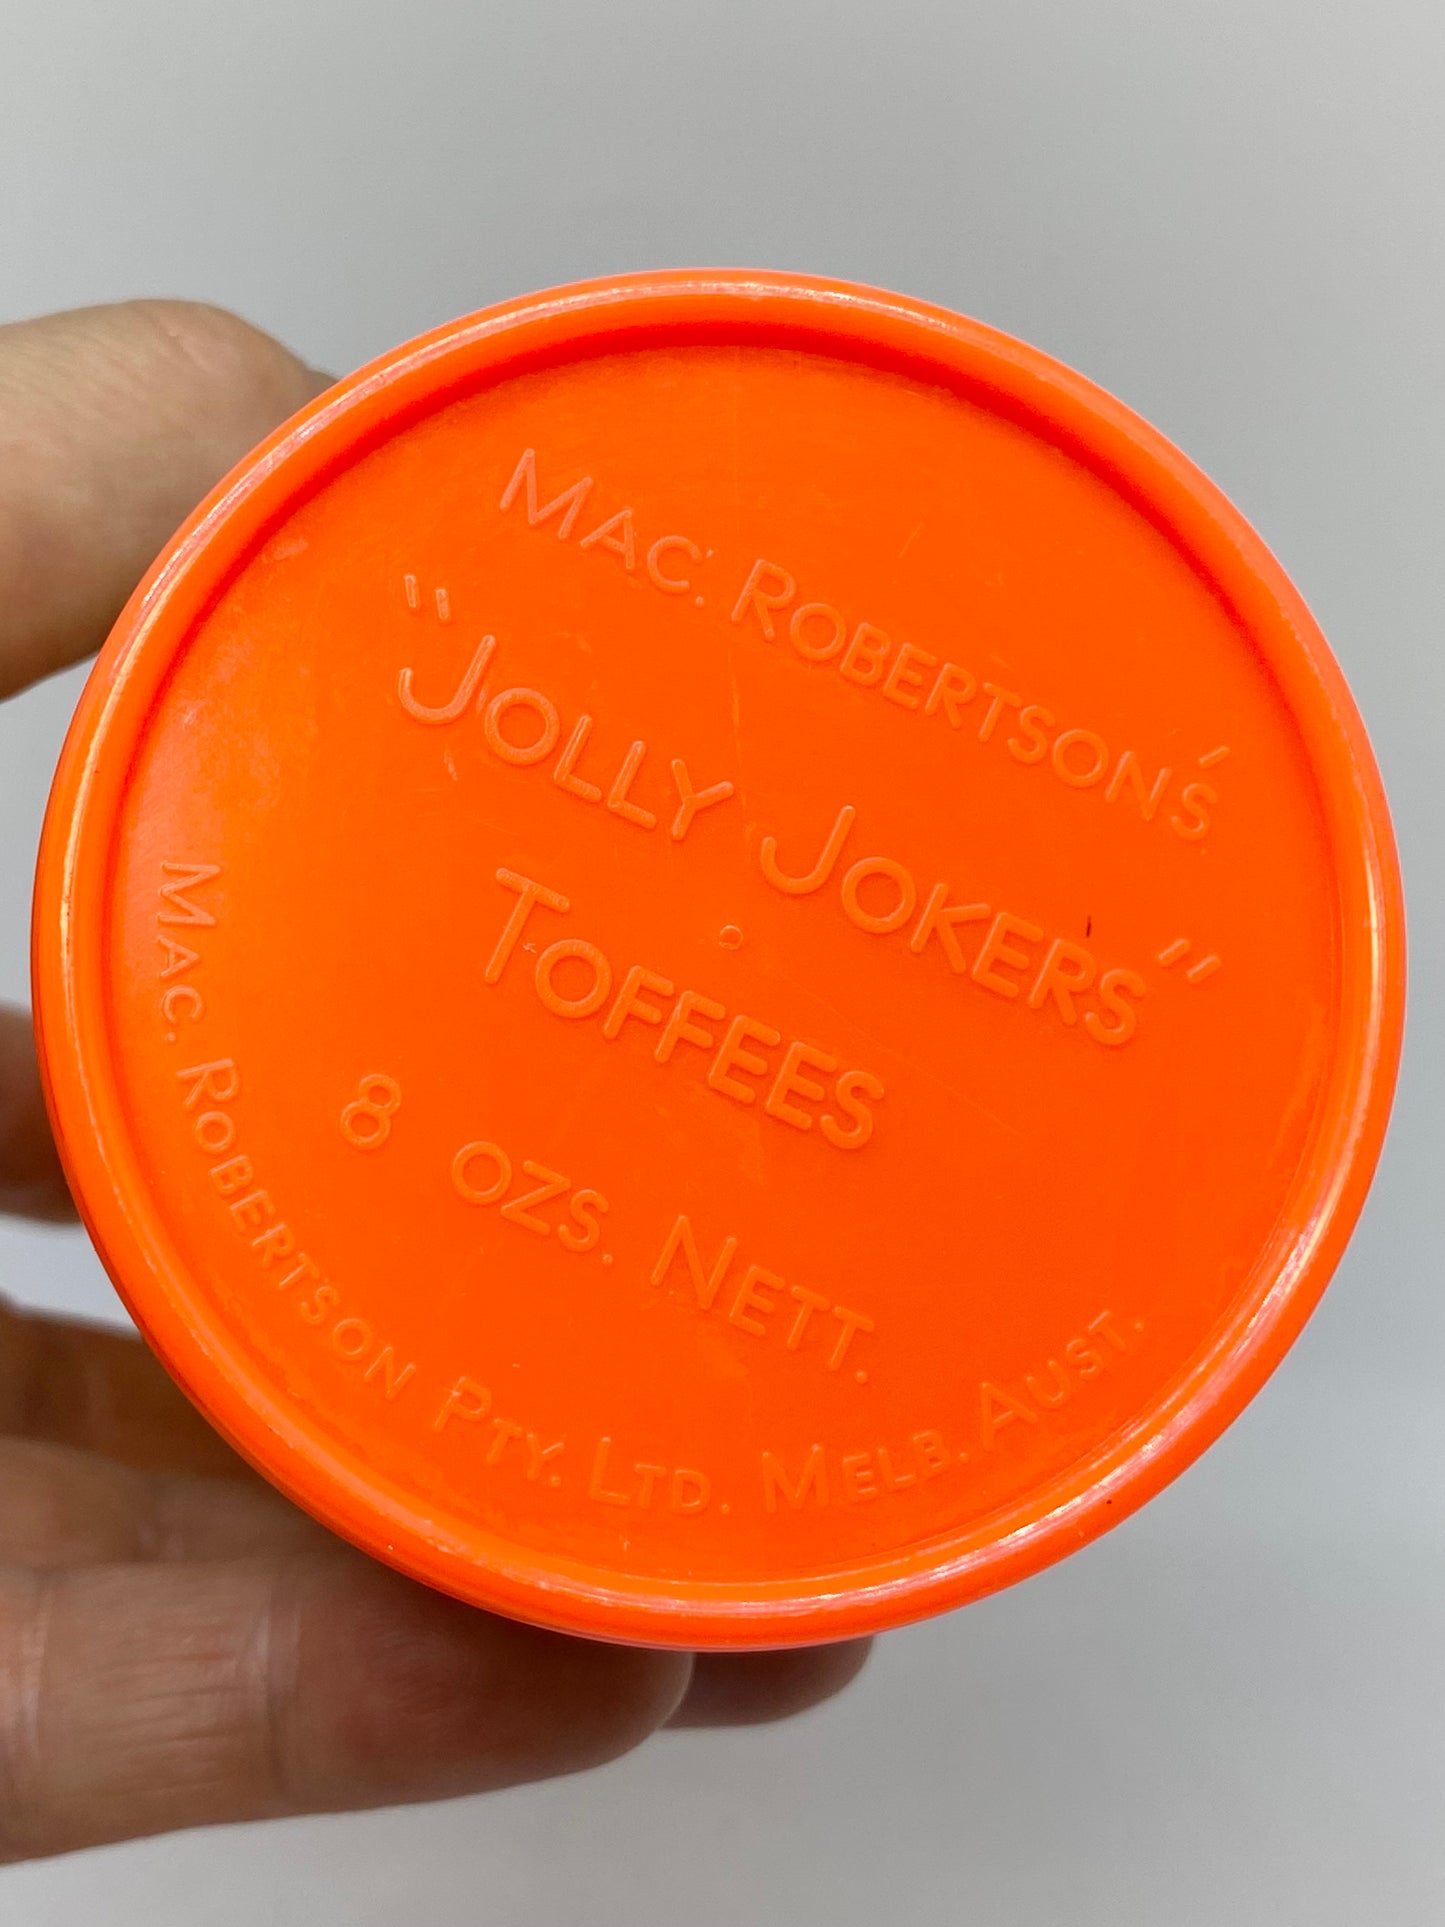 Vintage 1950s Mac Robertsons’ “Jolly Jokers Toffees” Box 8 oz - Made in Melbourne